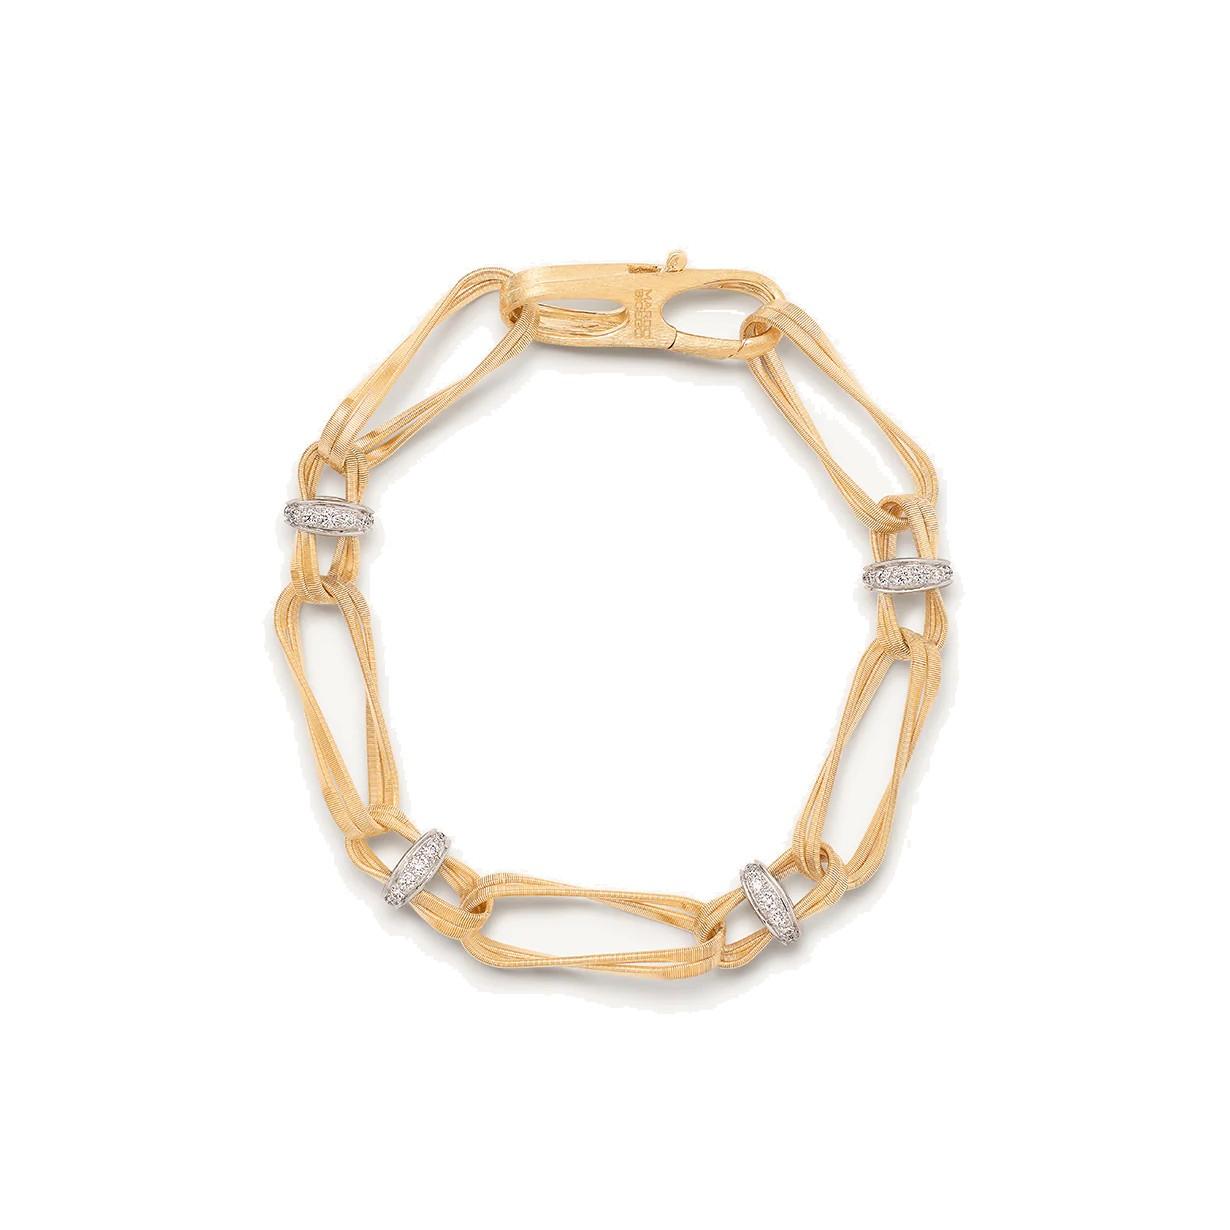 Marco Bicego Marrakech Onde Twisted Double Coil Link Bracelet with Diamonds 0